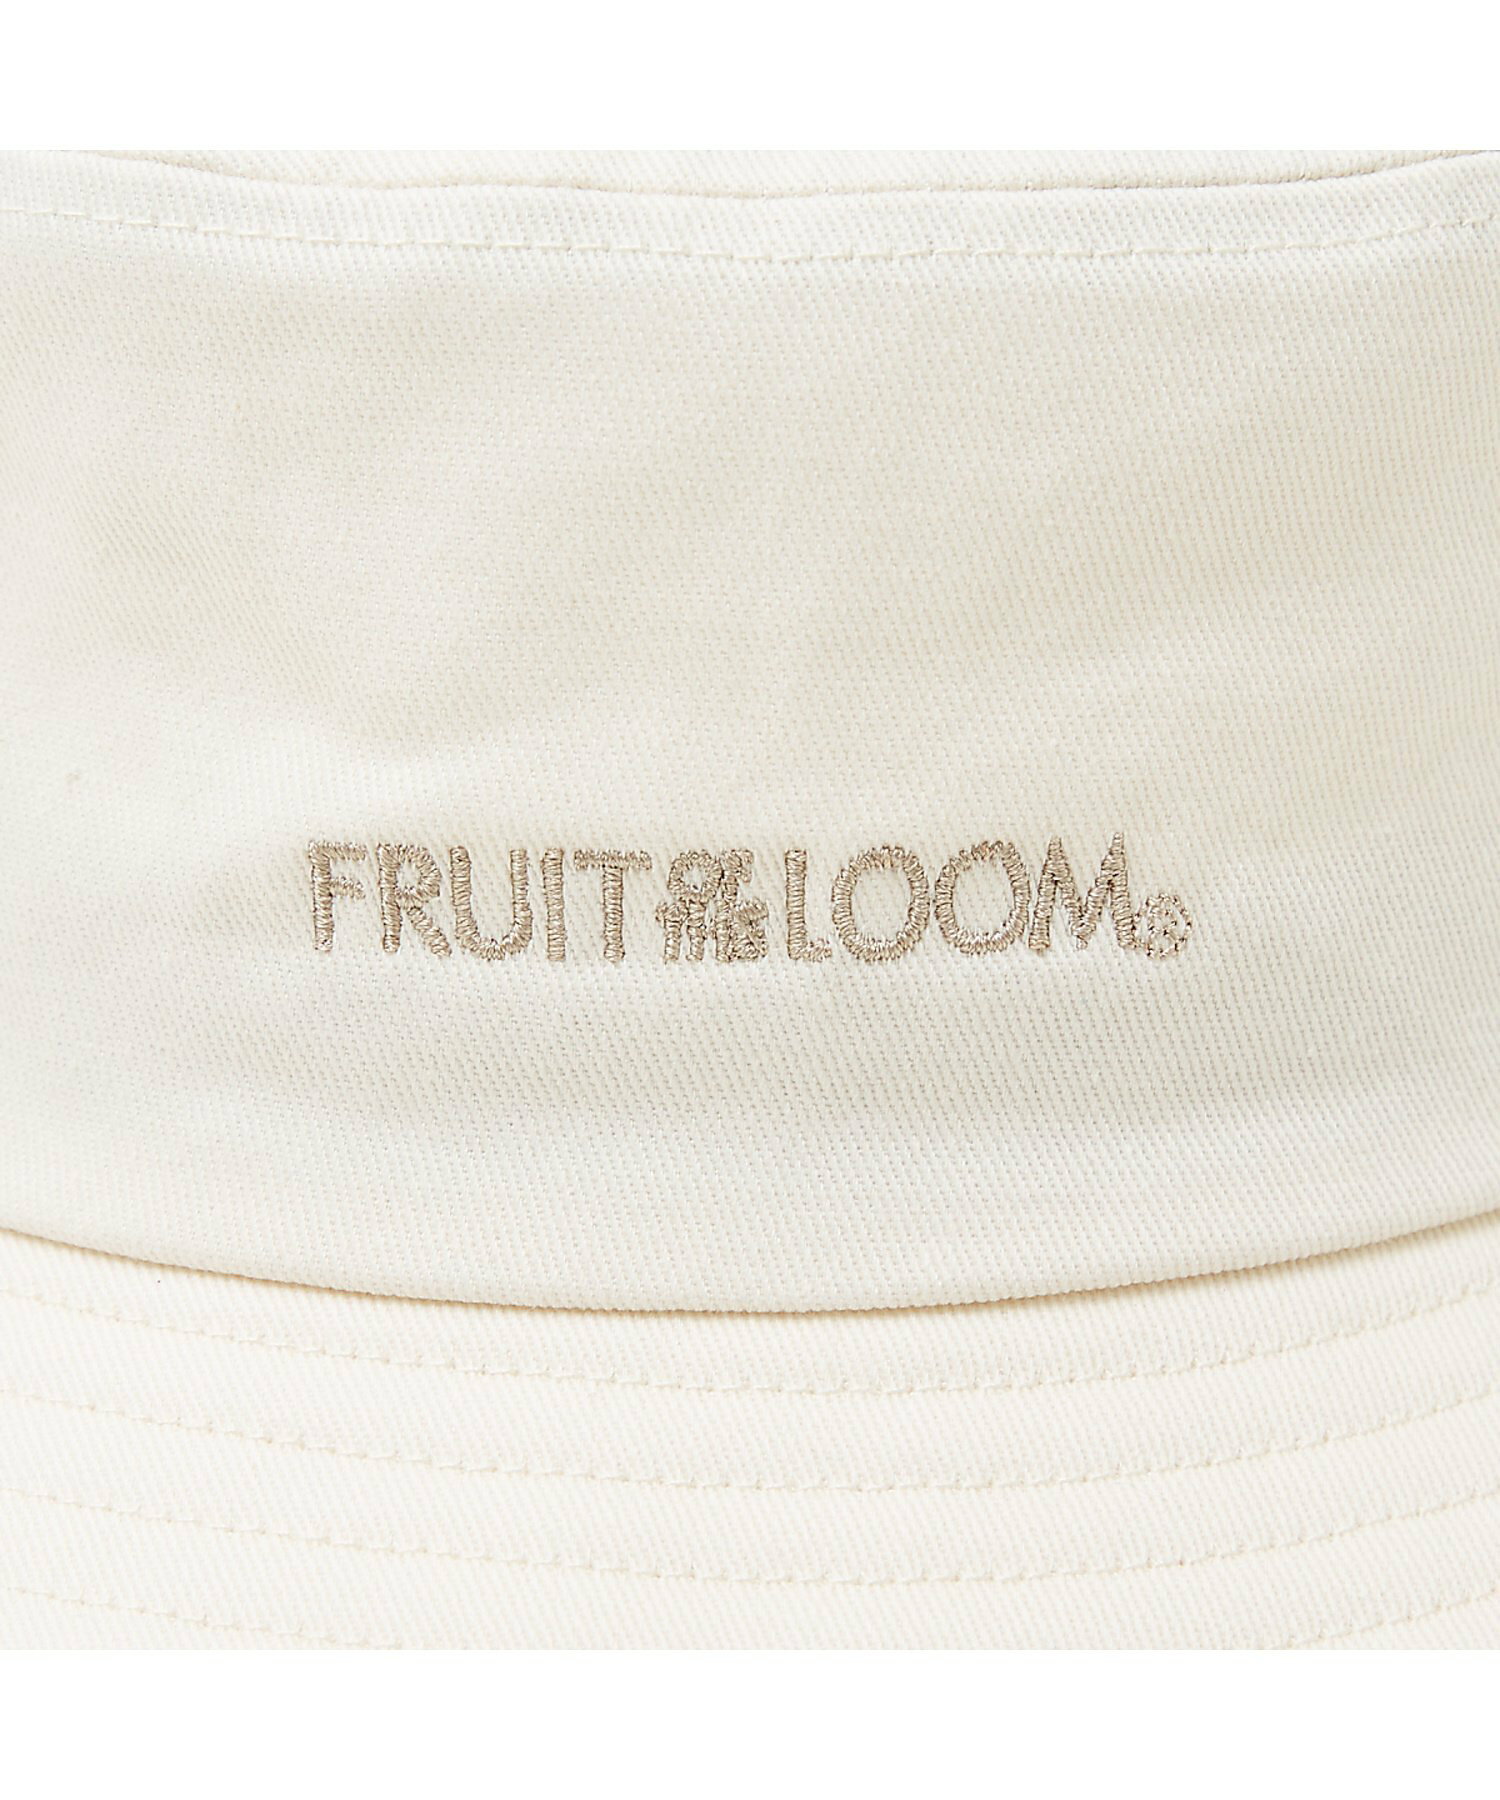 【FRUIT OF THE LOOM】フロントロゴ刺繍 ツイル バケット ハット